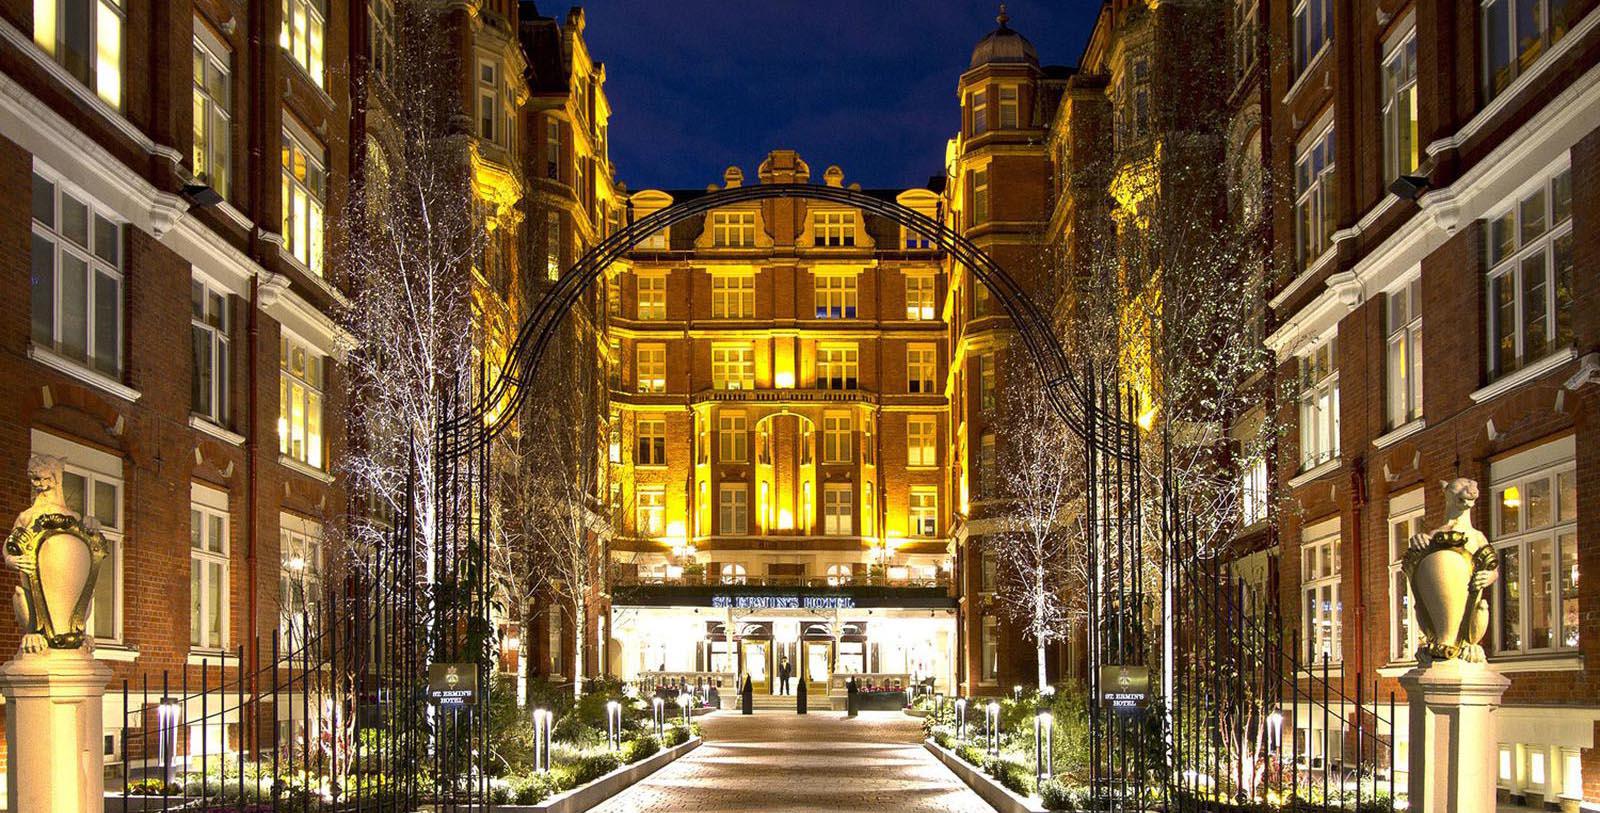 Image of hotel exterior St. Ermin's Hotel in London, England, United Kingdom